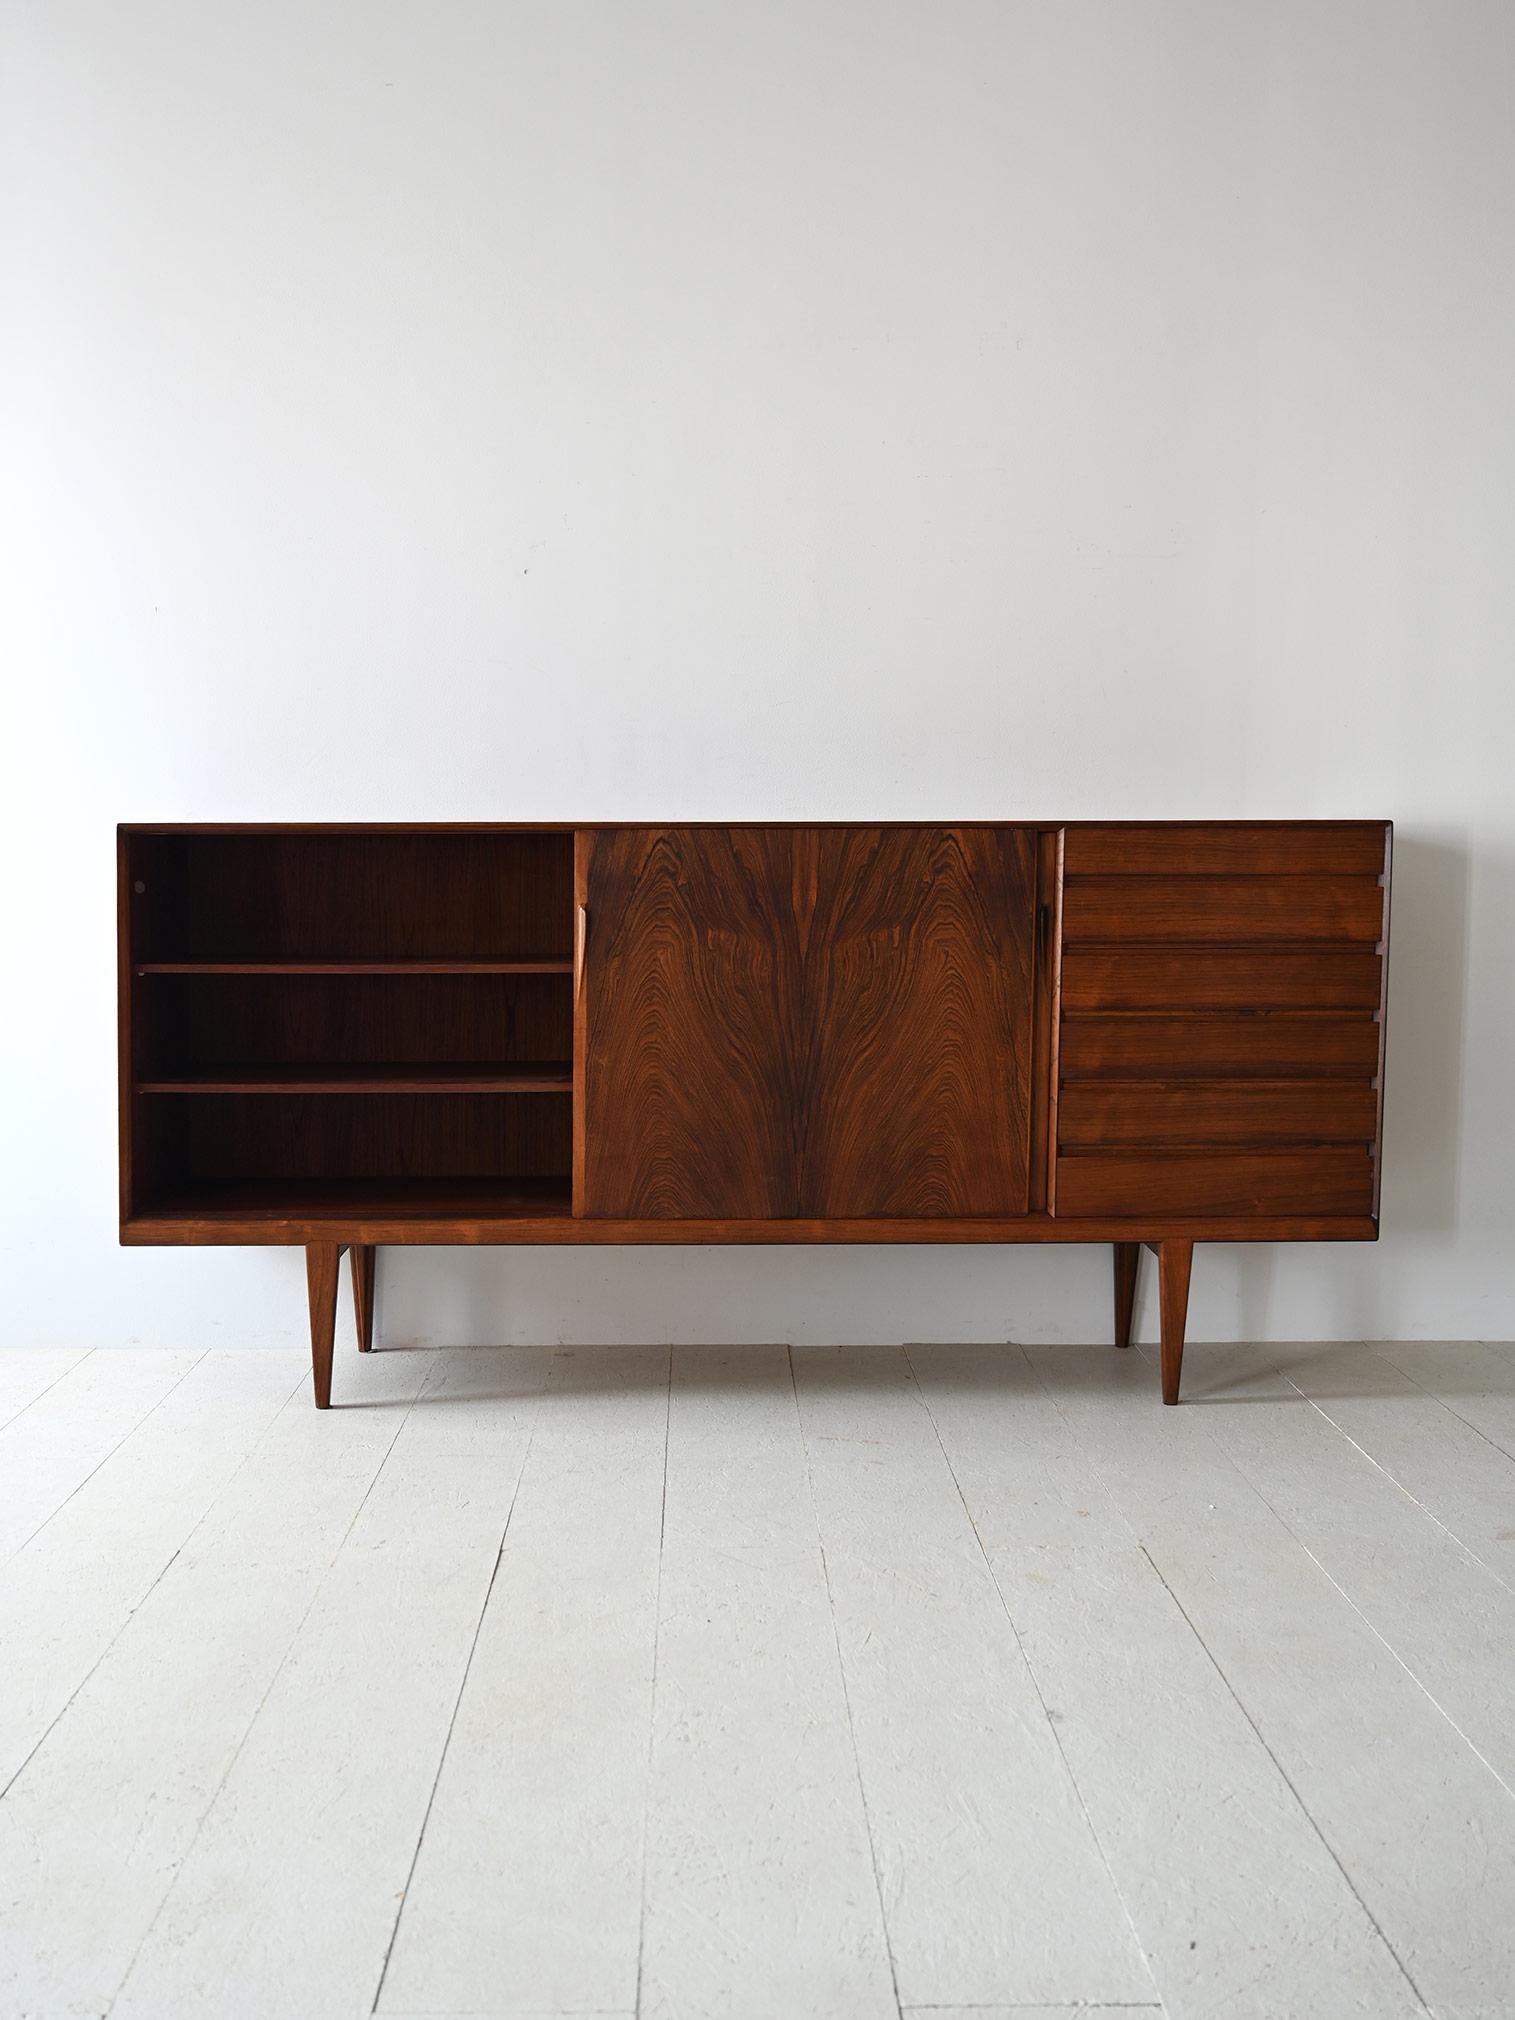 Elegant original Danish sideboard from the 1960s made of rosewood.
The refined and carefully detailed construction of this piece of furniture embodies the spirit of Nordic modernism, offering a blend of style, functionality, and impeccable